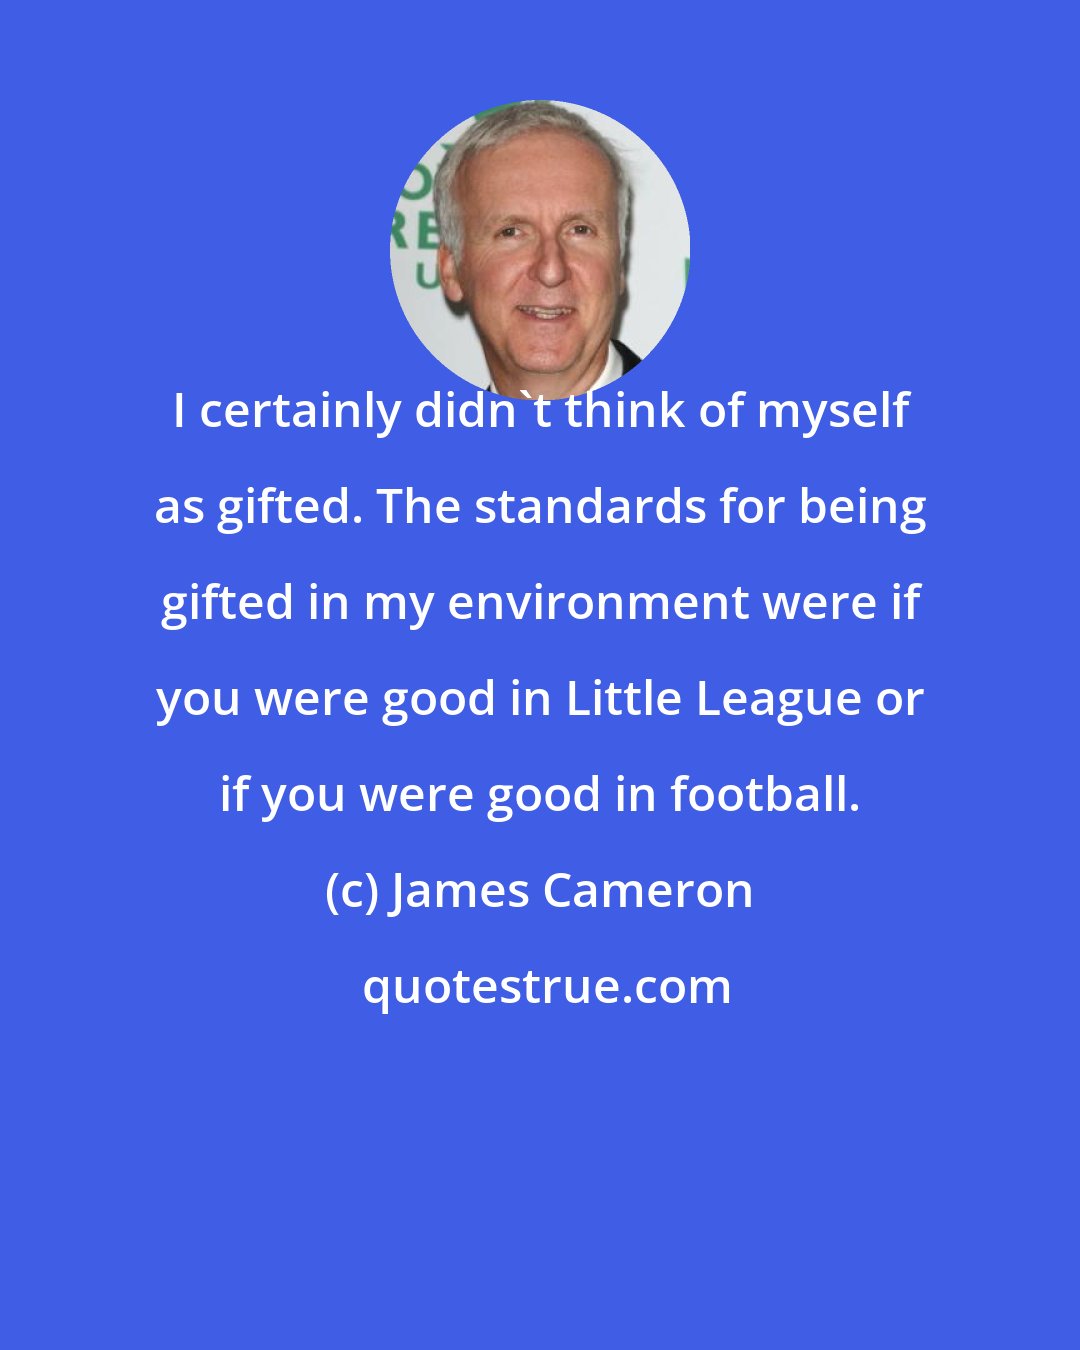 James Cameron: I certainly didn't think of myself as gifted. The standards for being gifted in my environment were if you were good in Little League or if you were good in football.